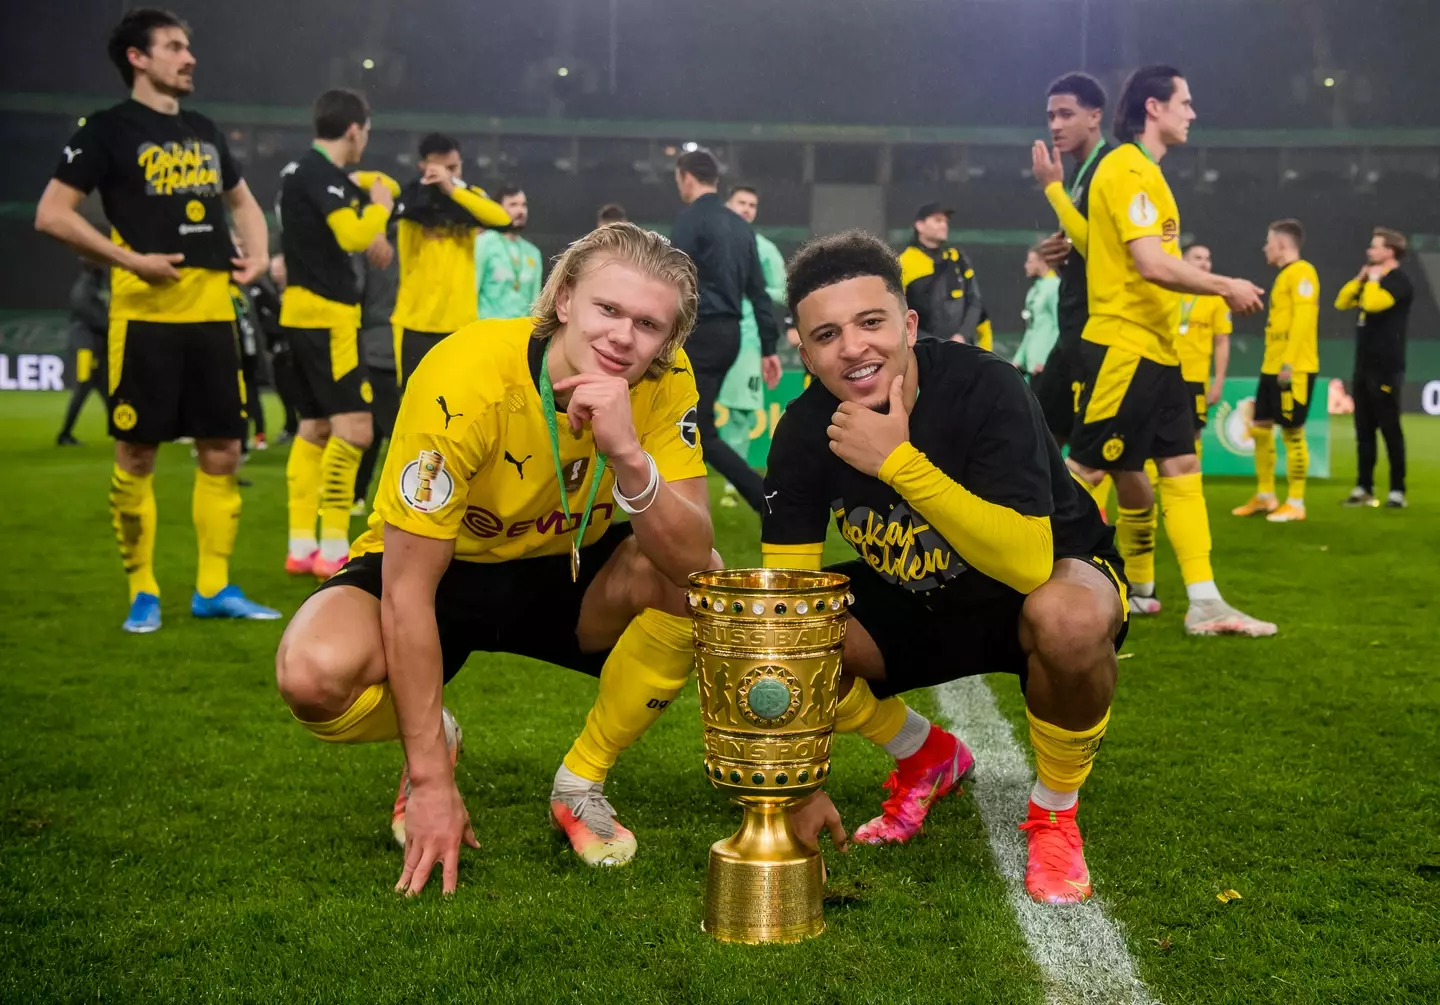 Haaland and Sancho played together for 18 months. (Image